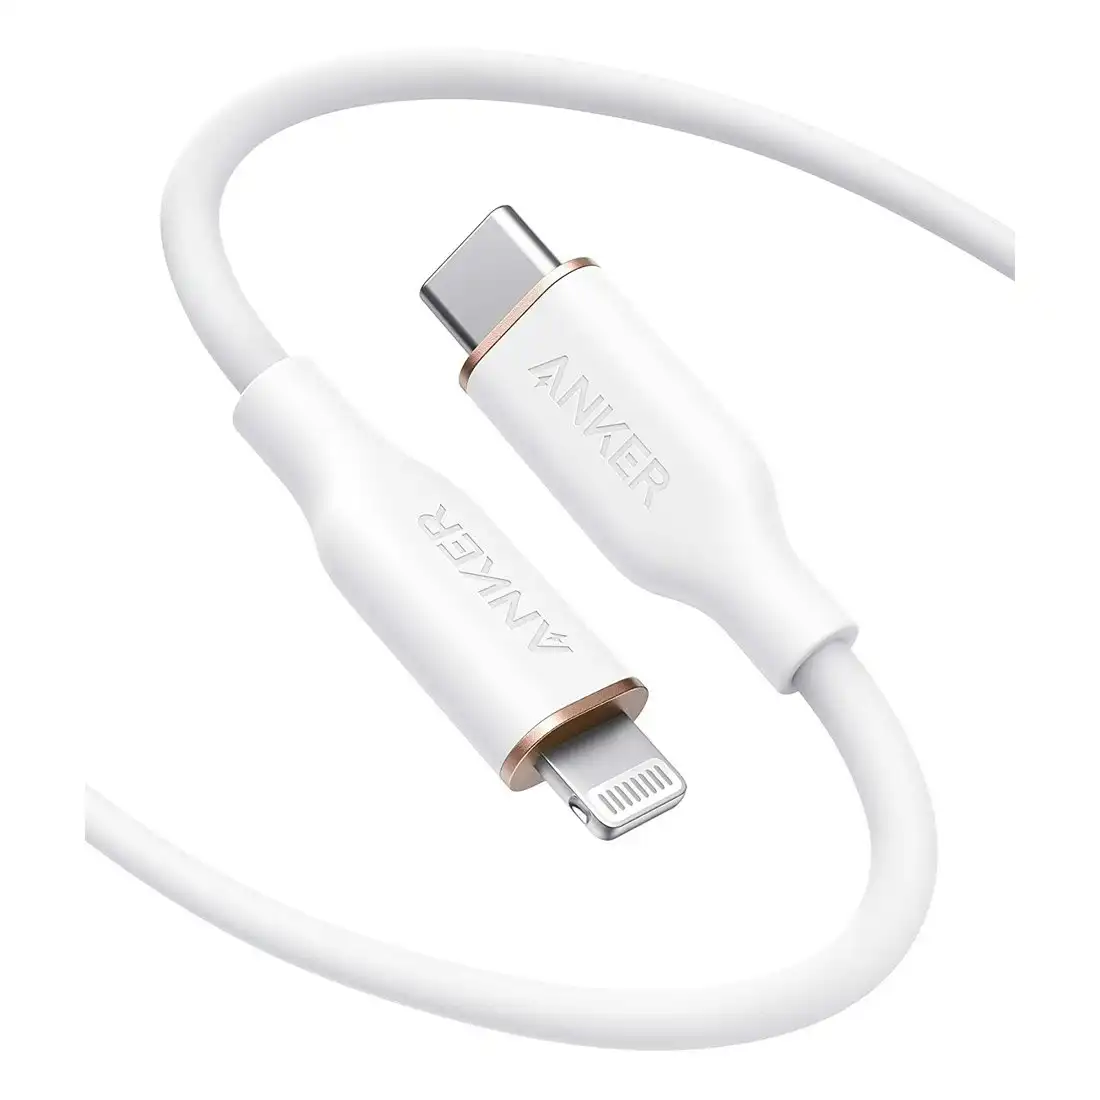 Anker 641 USB-C to Lightning Cable (Powerline III Flow, 6ft Silicone) - White